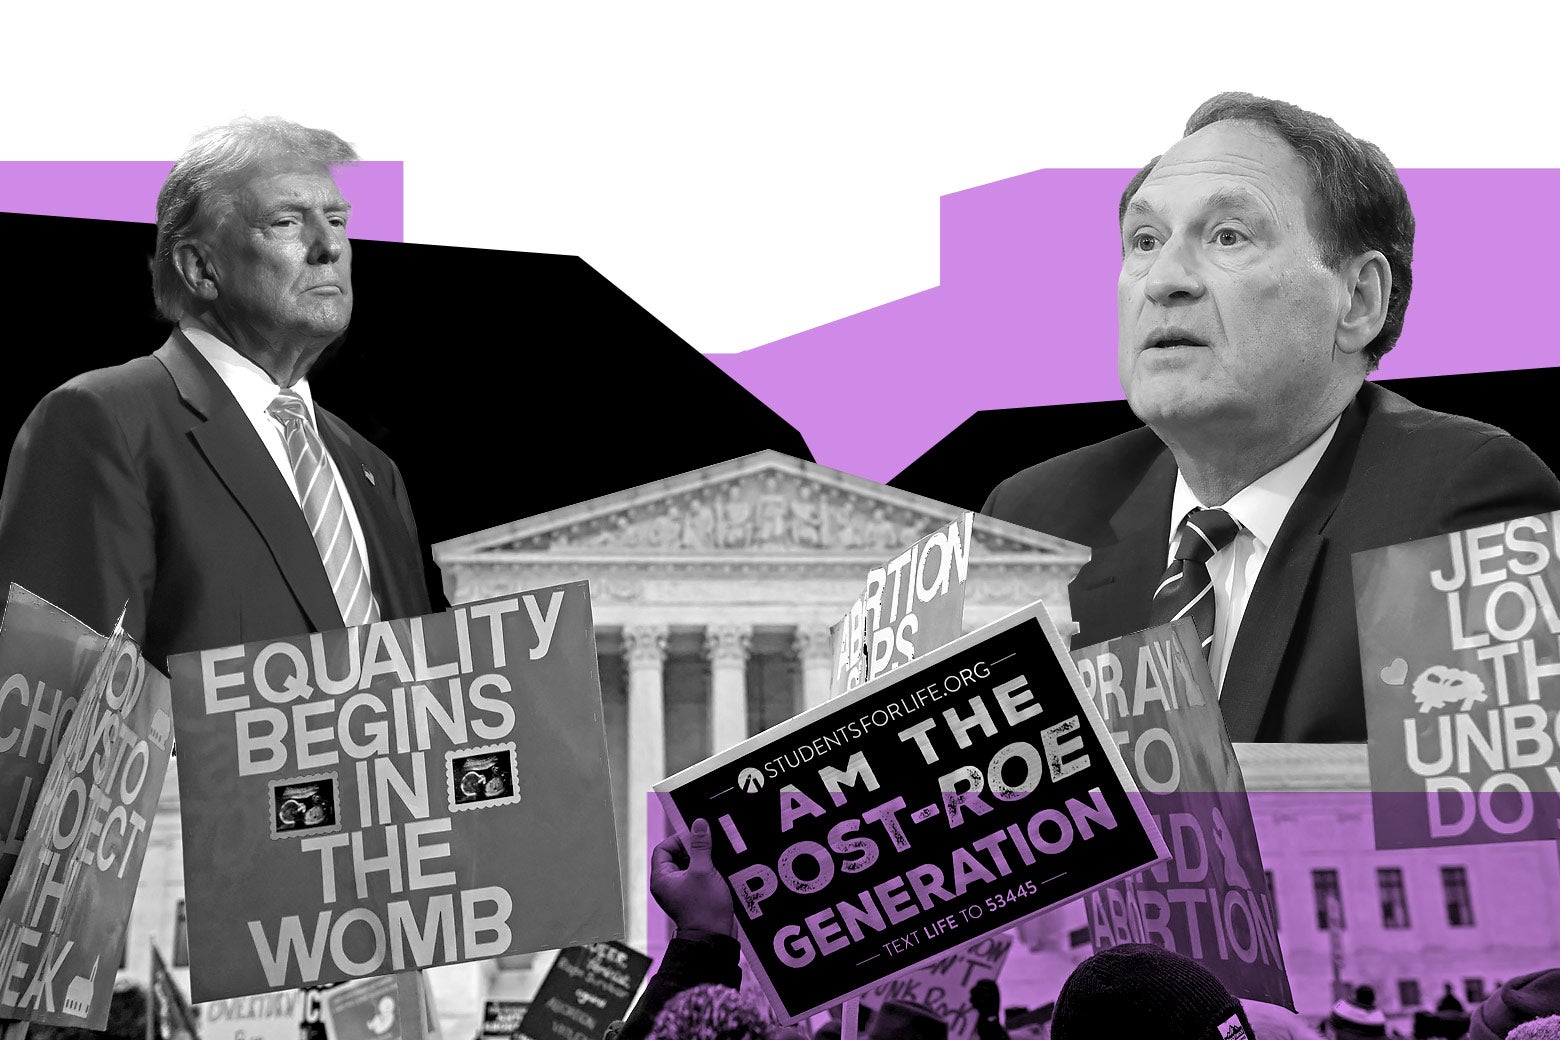 The Supreme Court Just Laid Out a Road Map for Trump to Ban Abortion Nationwide